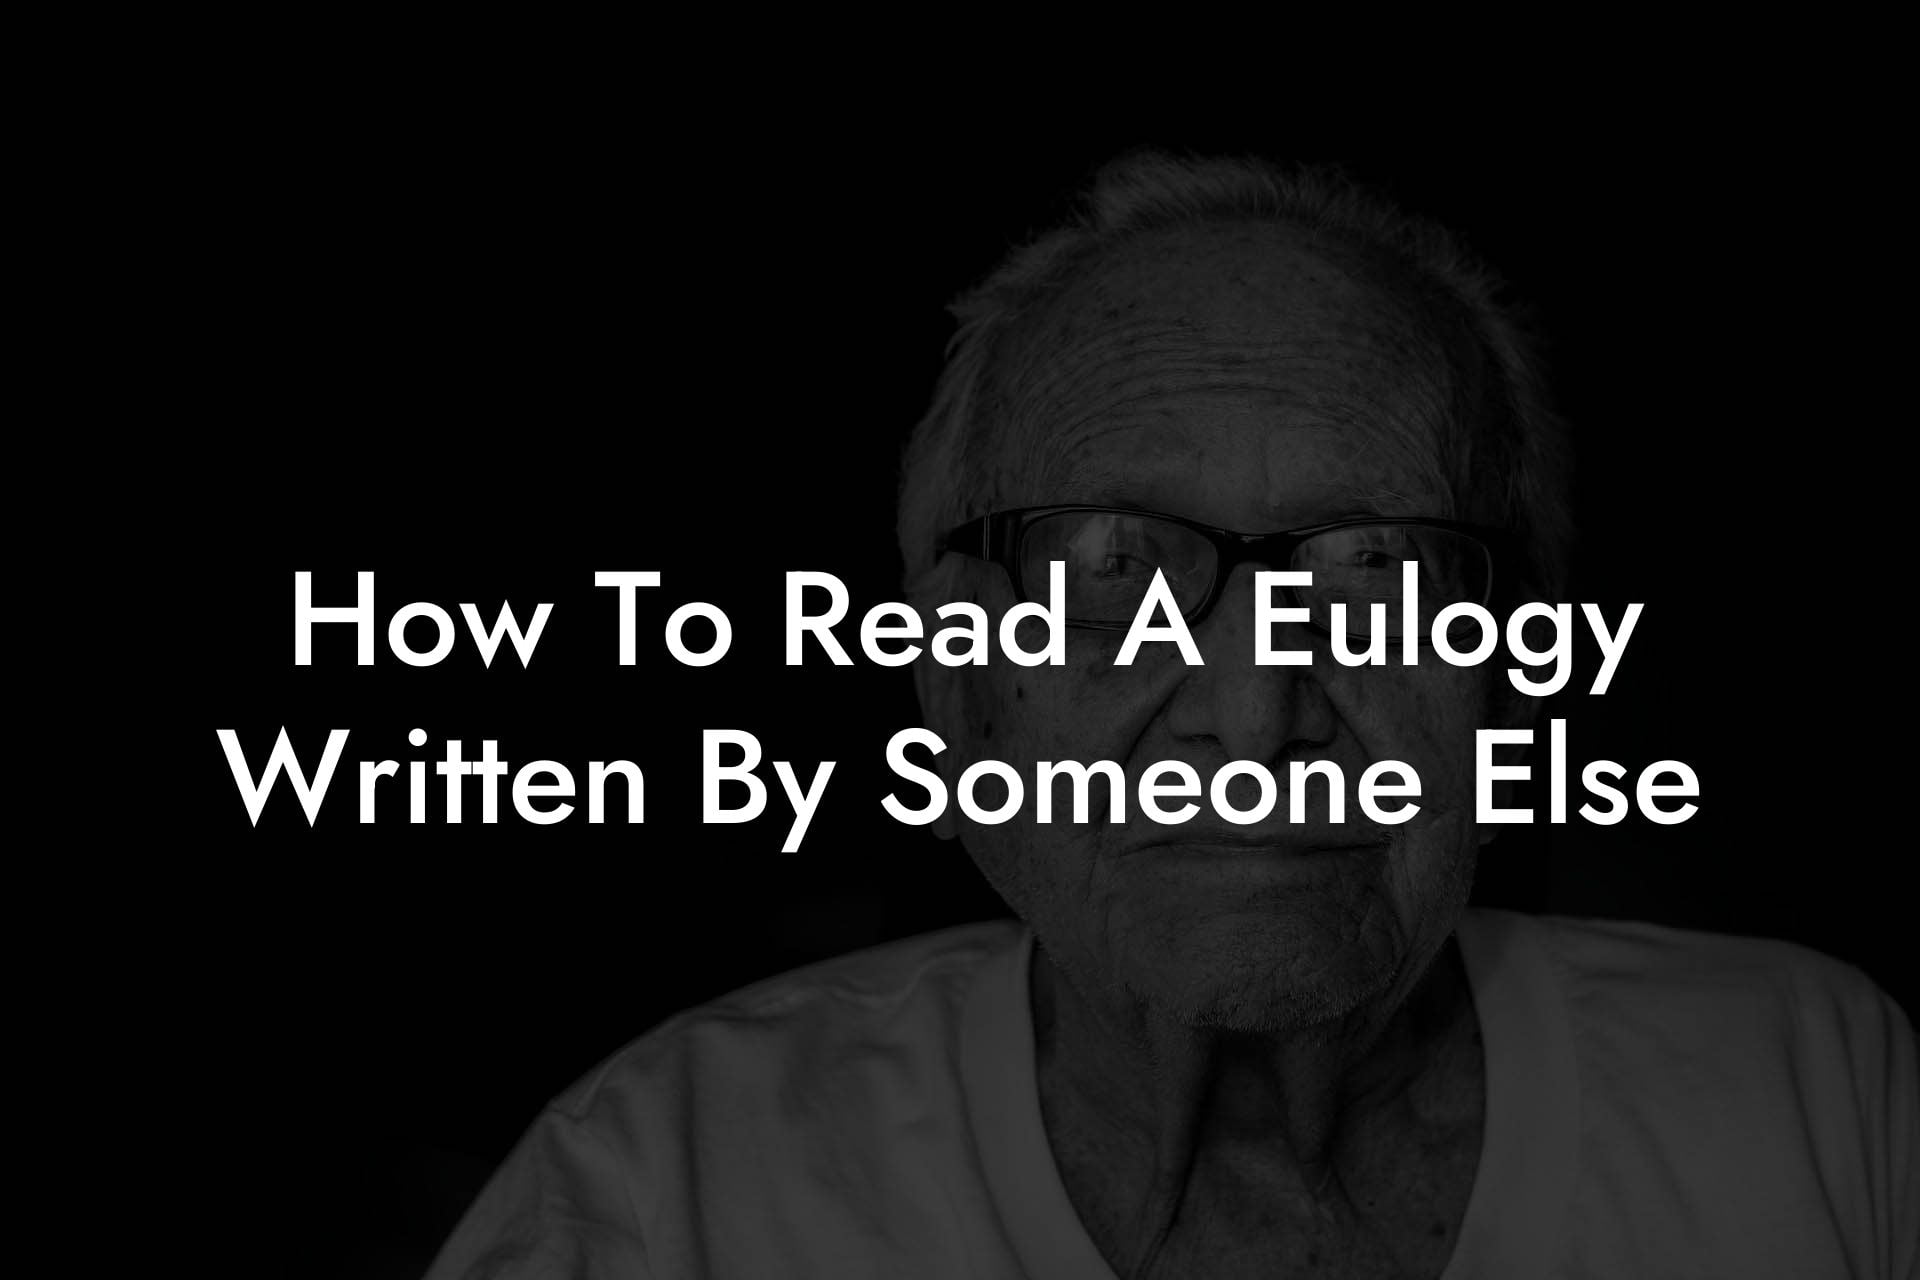 How To Read A Eulogy Written By Someone Else